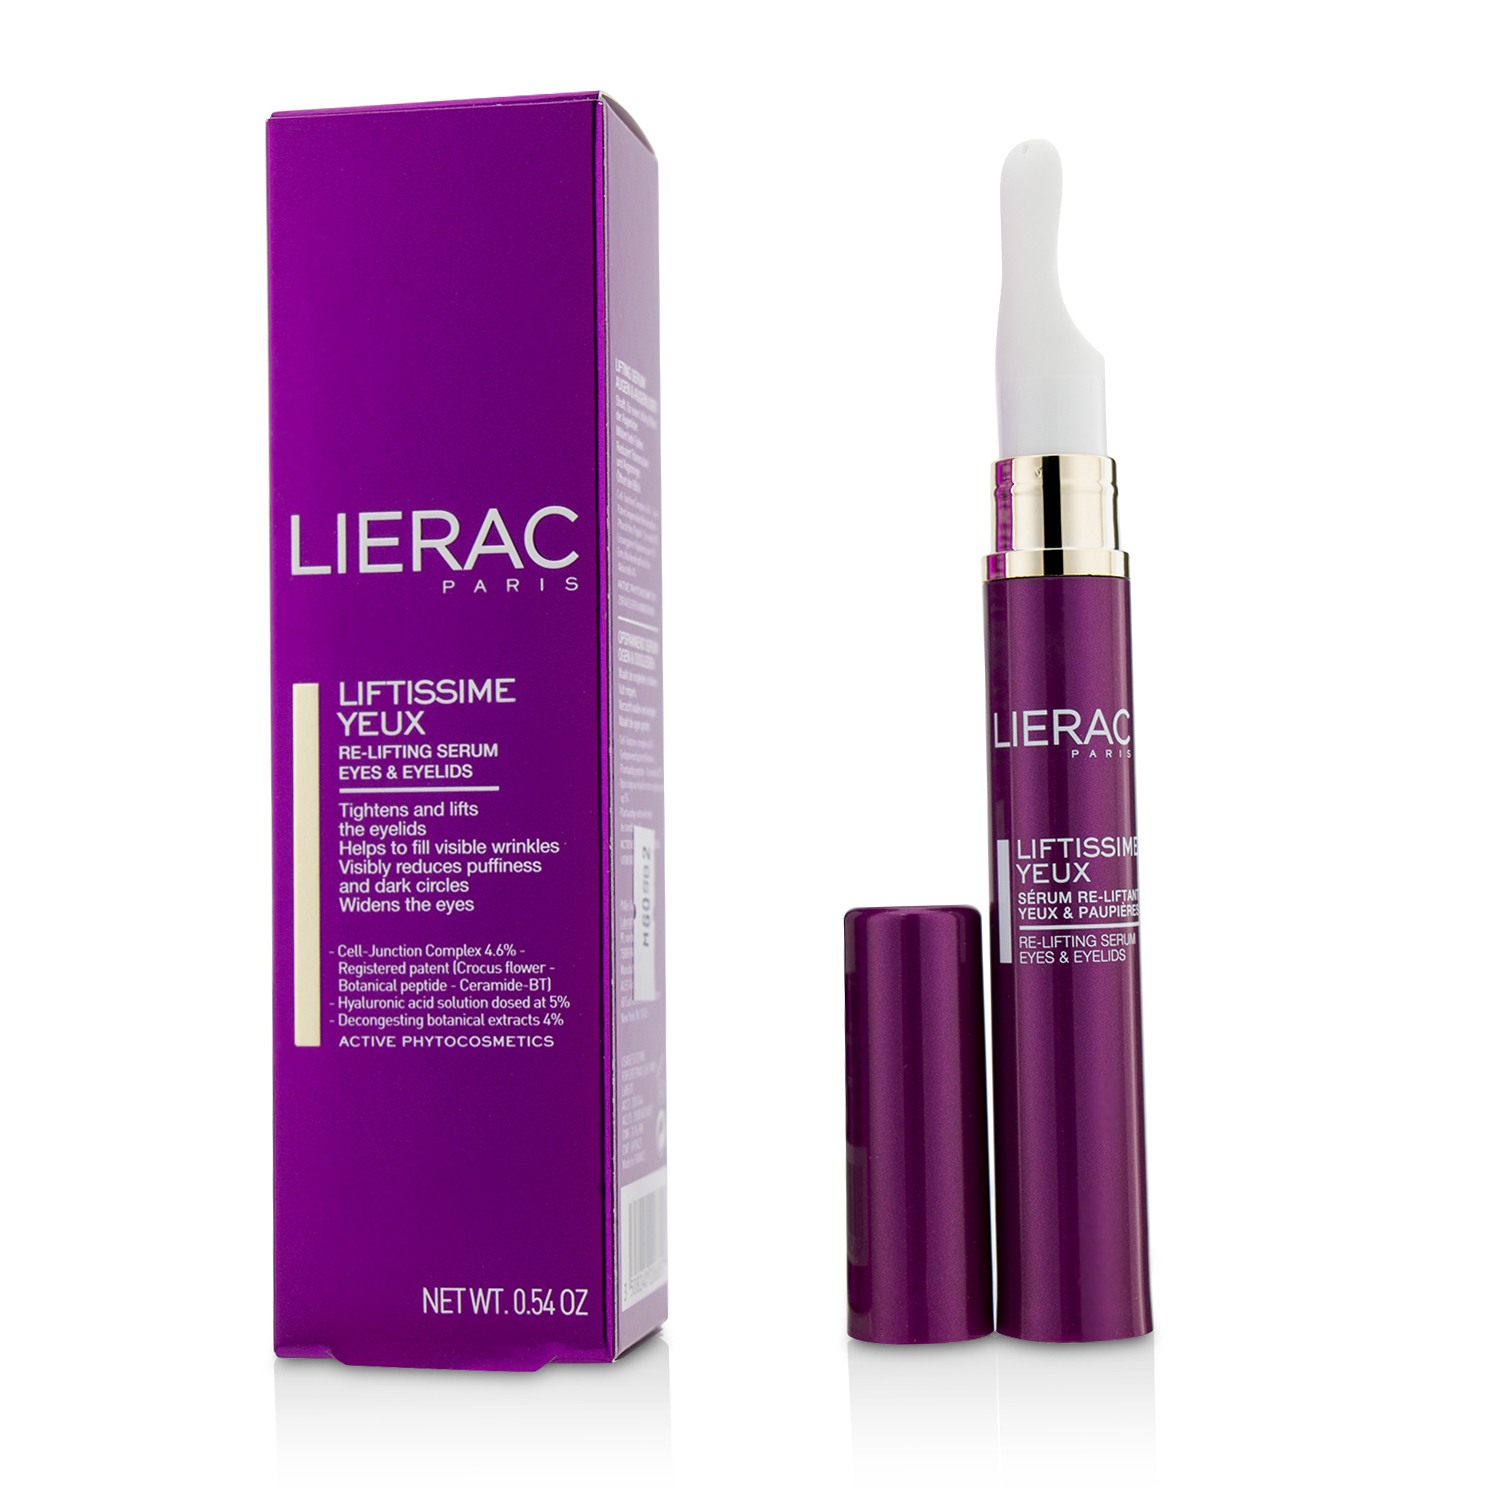 Liftissime Yeux Re-Lifting Serum For Eyes and Eyelids Lierac Image